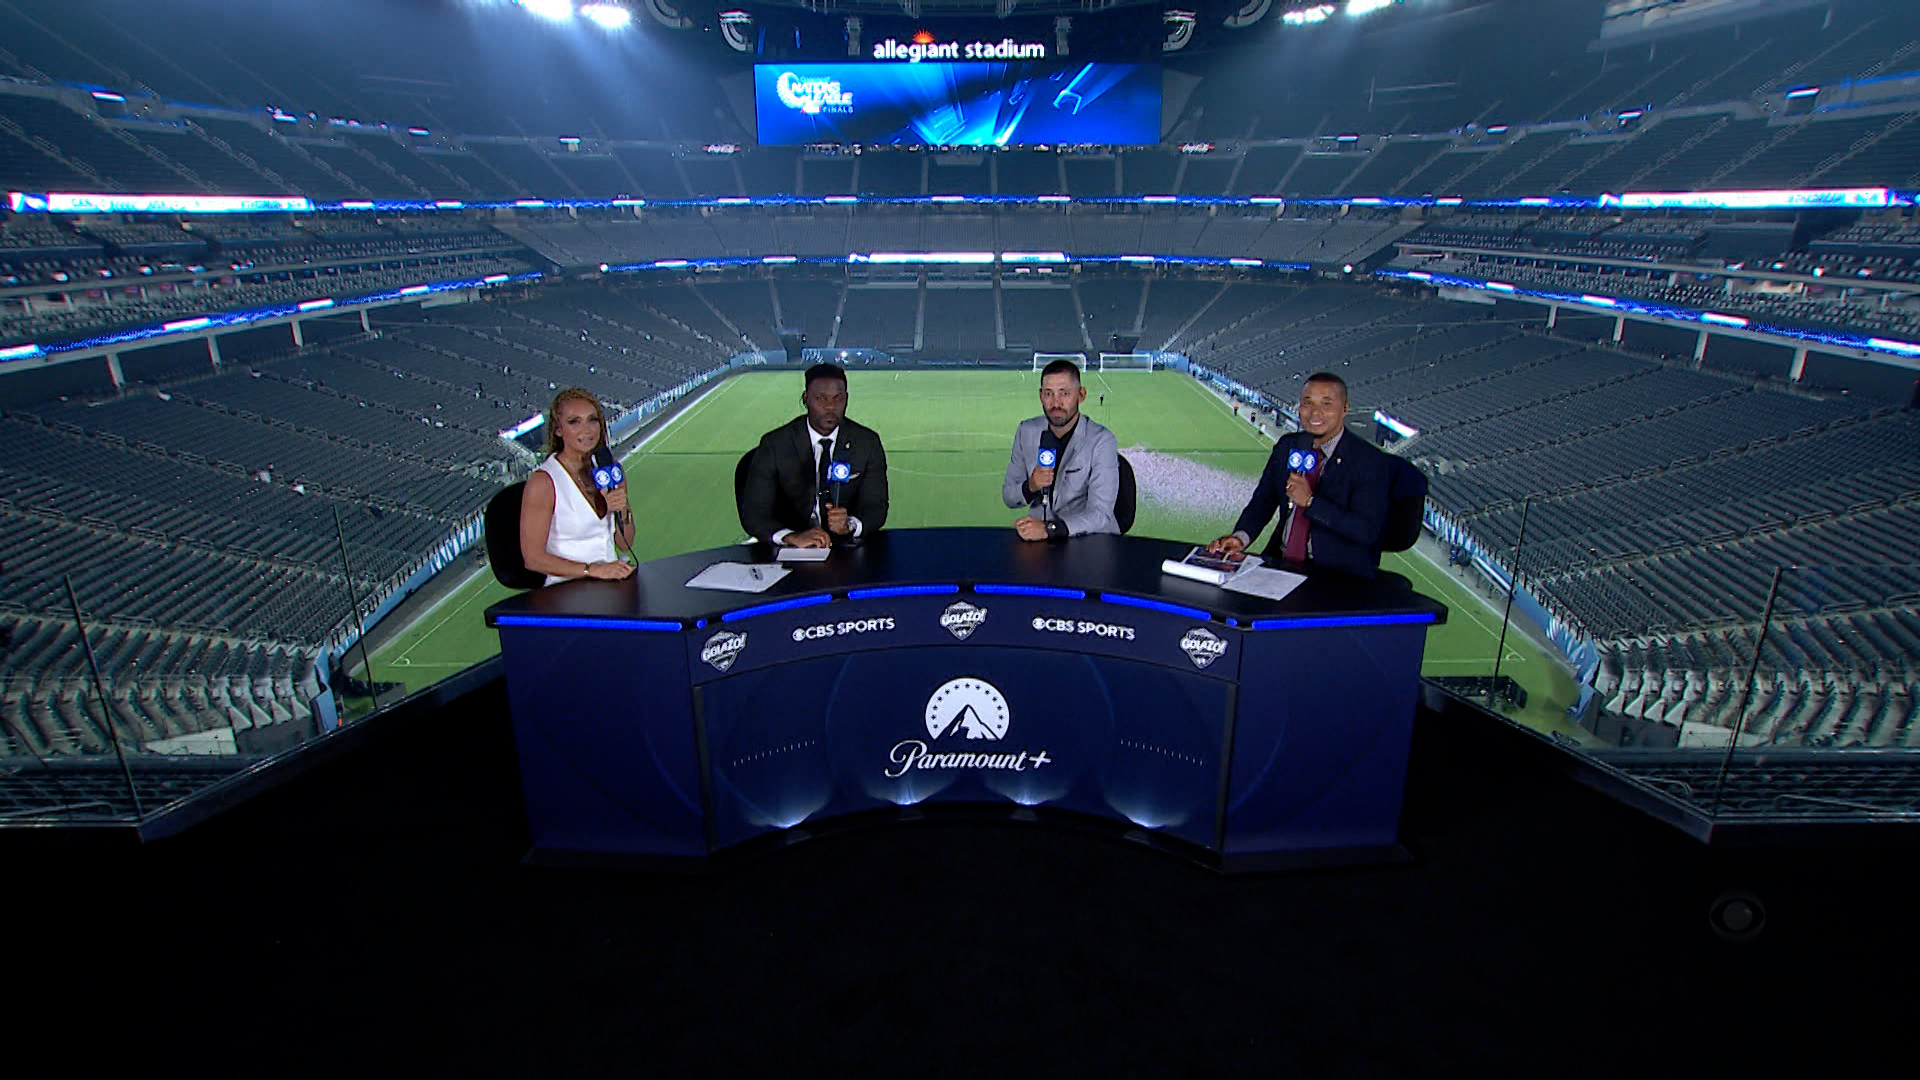 Concacaf Nations League Season 2023 Episodes - Watch on Paramount+